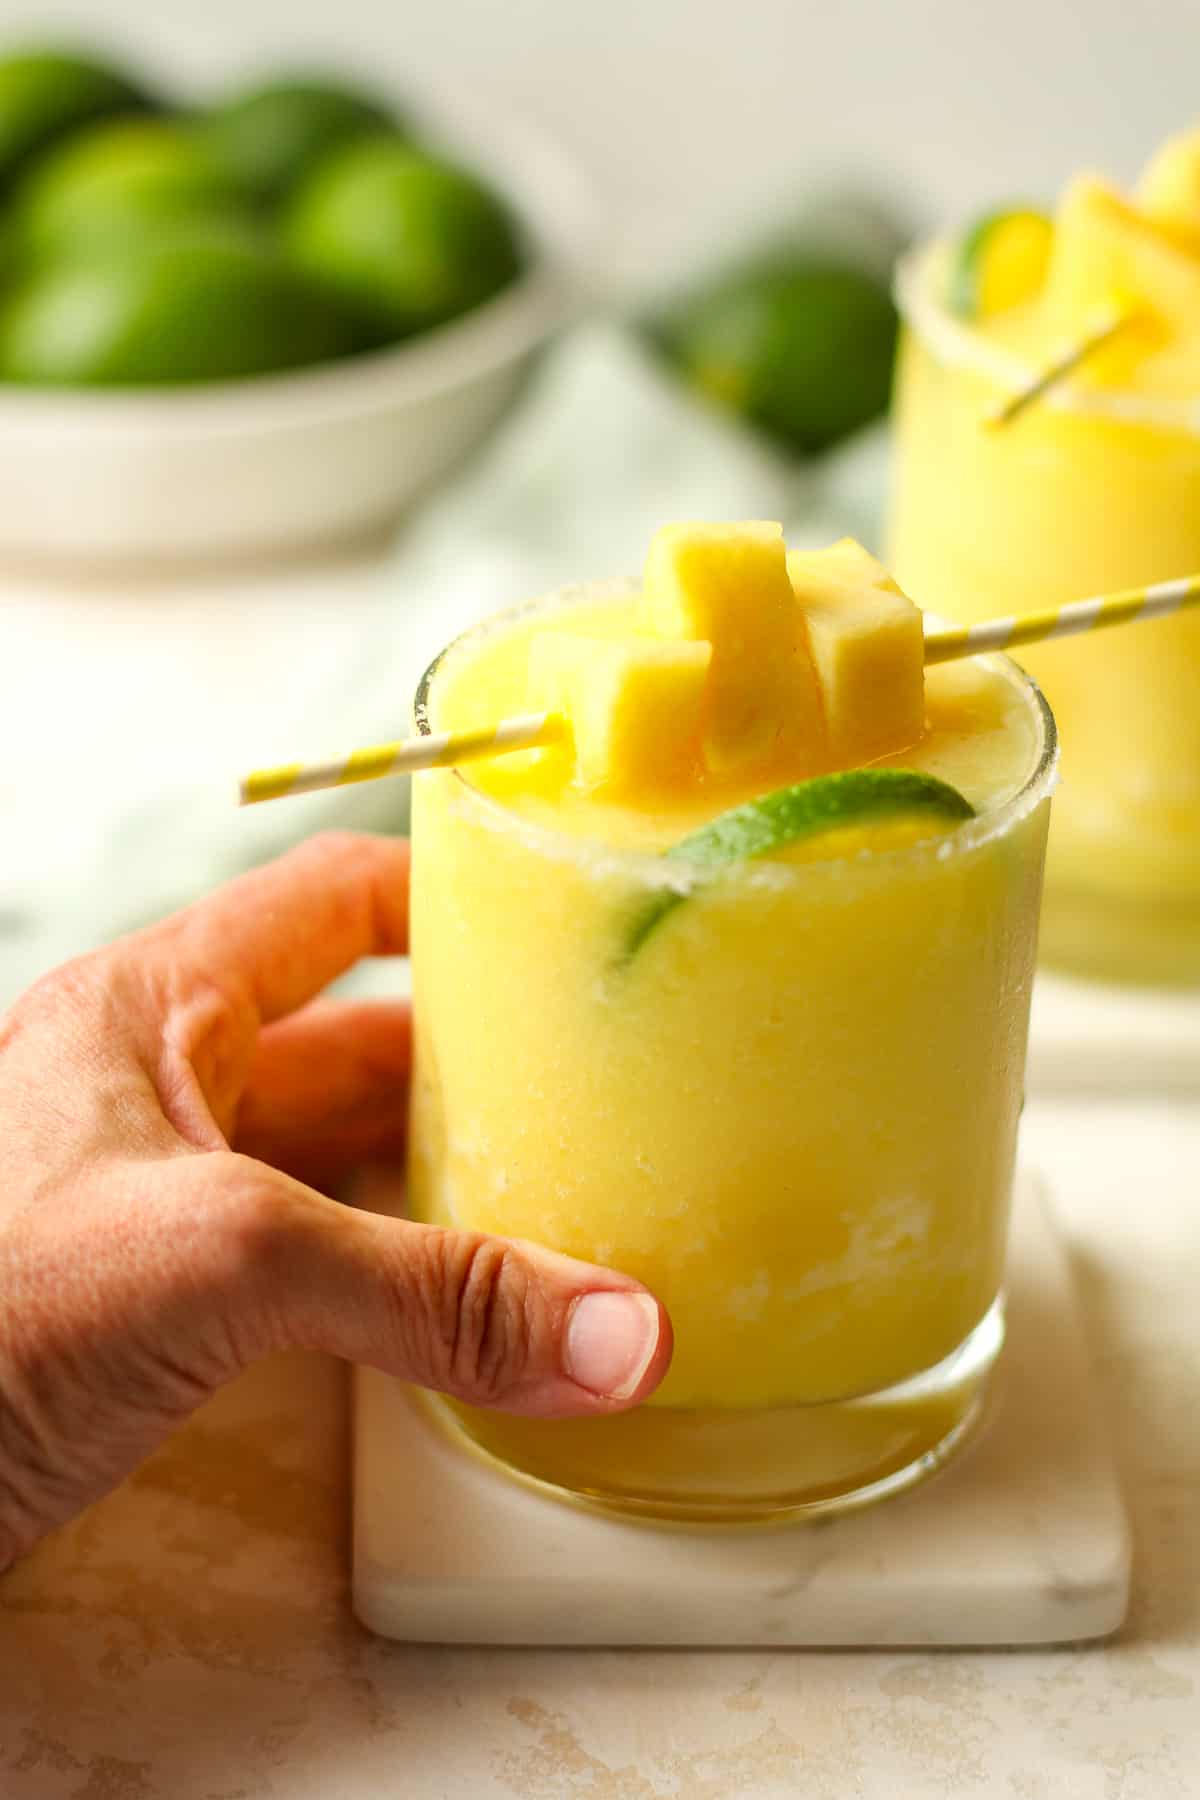 My hand on a glass of frozen pineapple margaritas with a garnish of pineapple chunks.